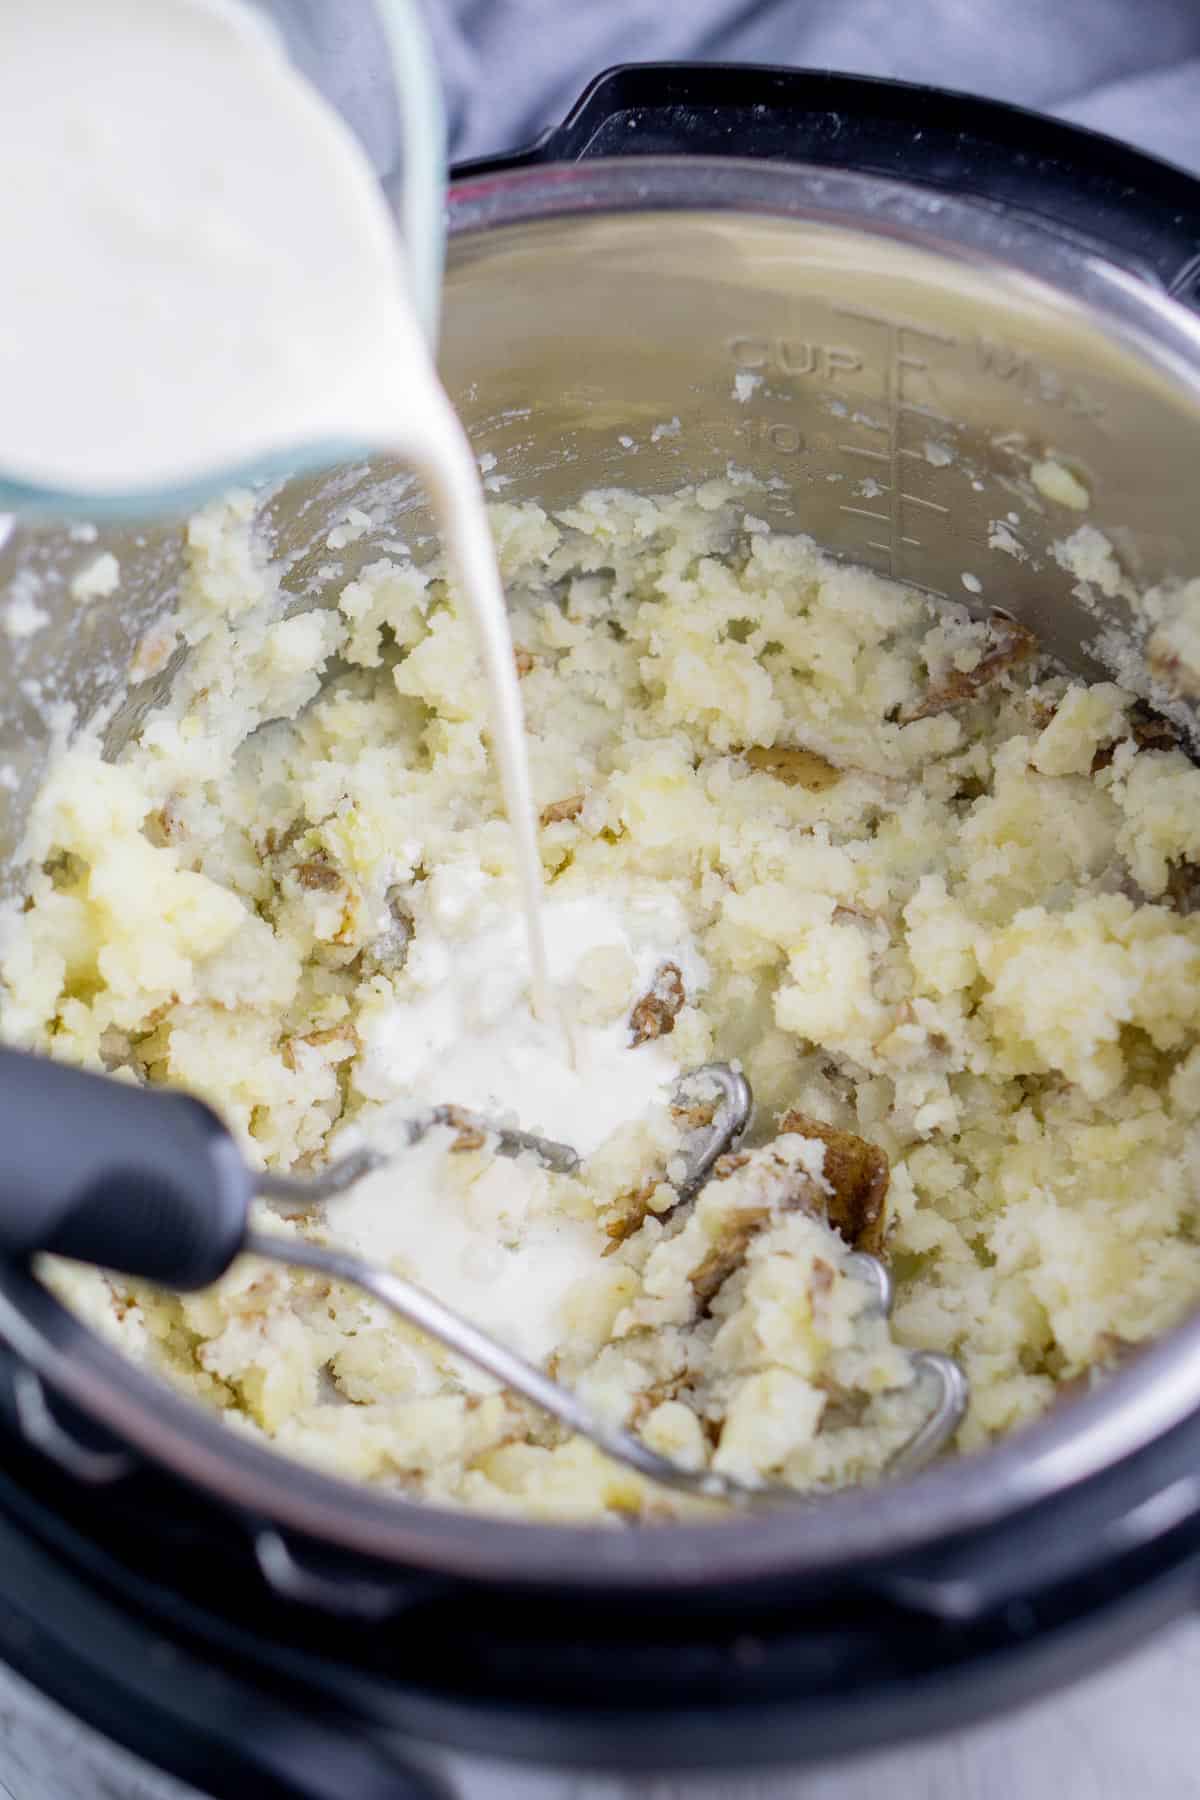 Heavy cream is added to mashed potatoes in Instant Pot